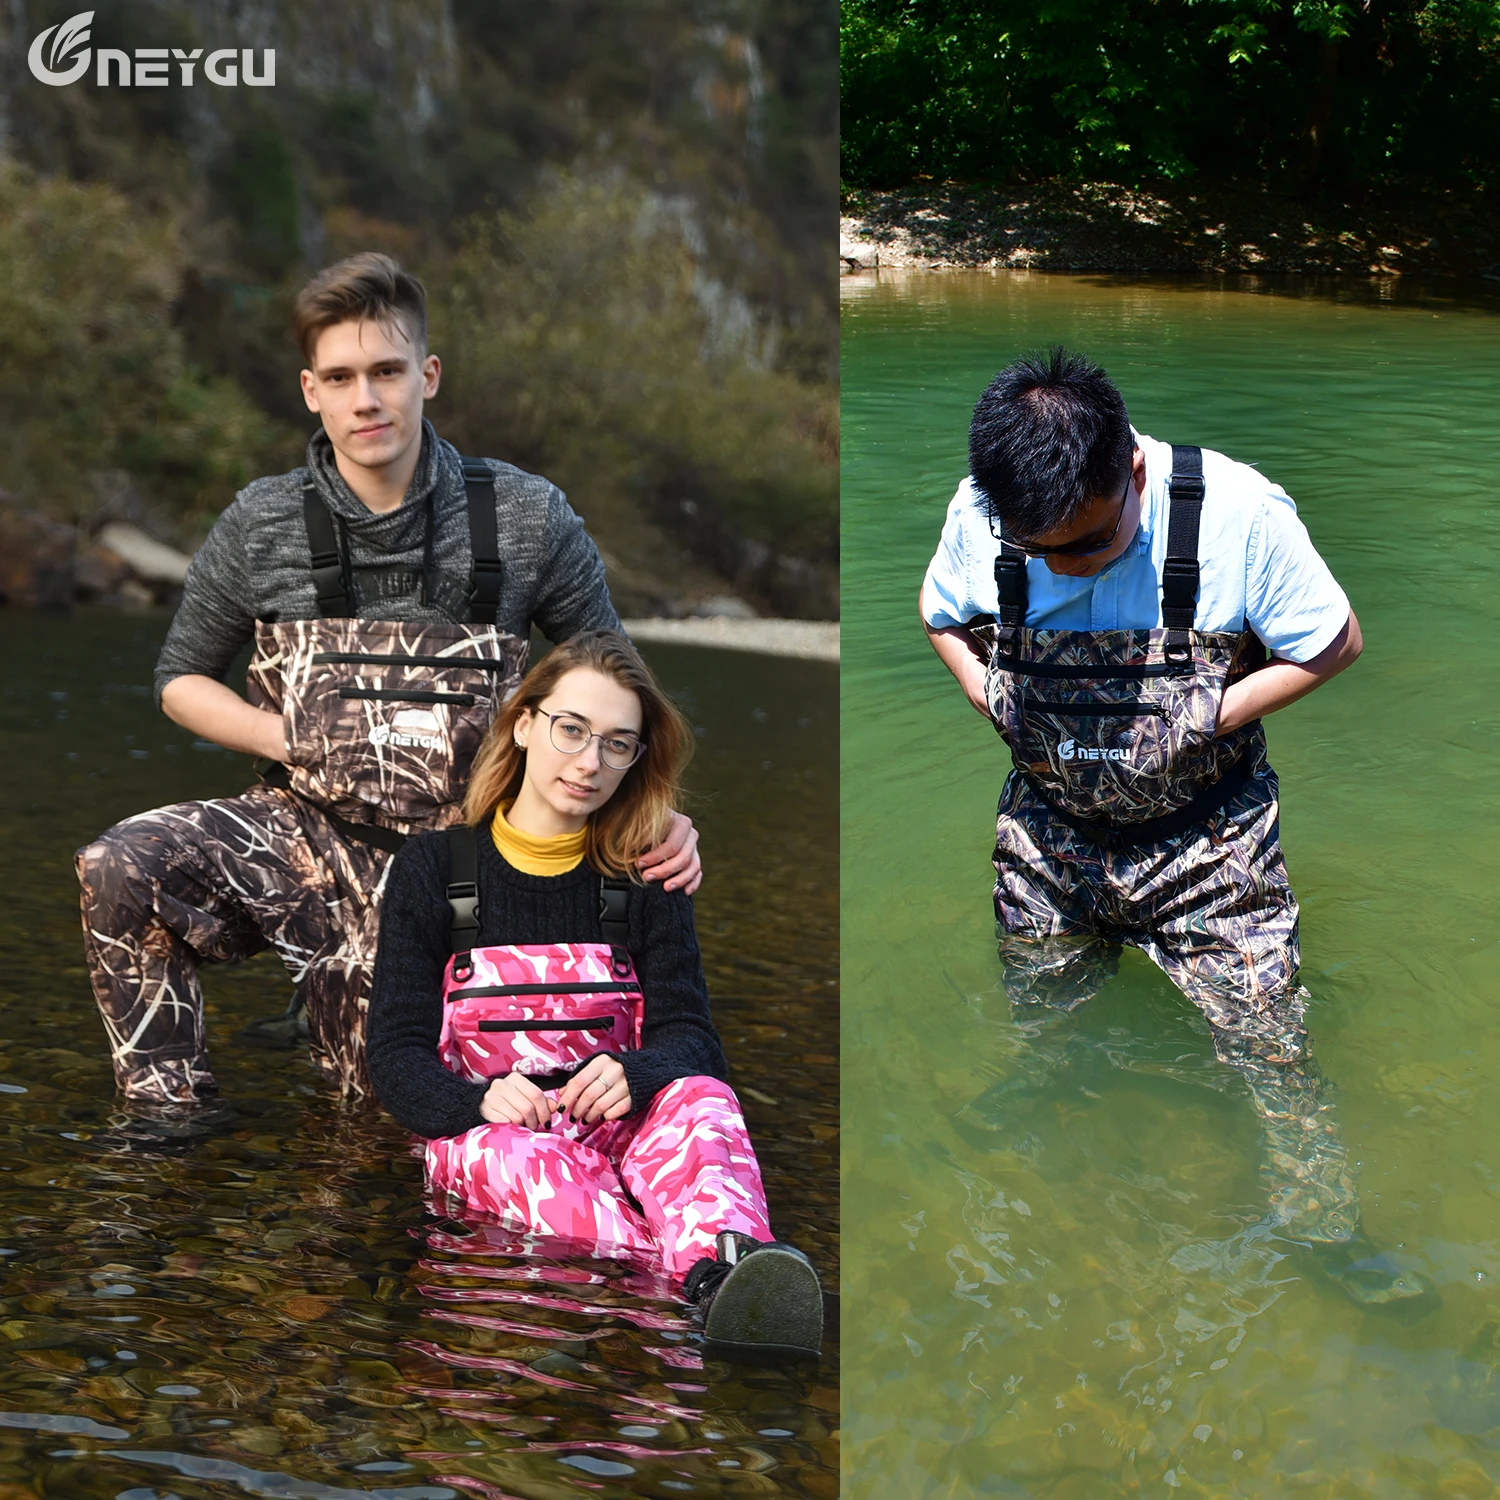 https://ae01.alicdn.com/kf/H8711ffb14e0a470aa1b63b31f4960e6eP/Outdoor-Fly-Fishing-Stocking-Foot-wader-2-patterns-Waterproof-Hunting-Pants-Playing-Water-Sand-Snow-Trousers.jpg